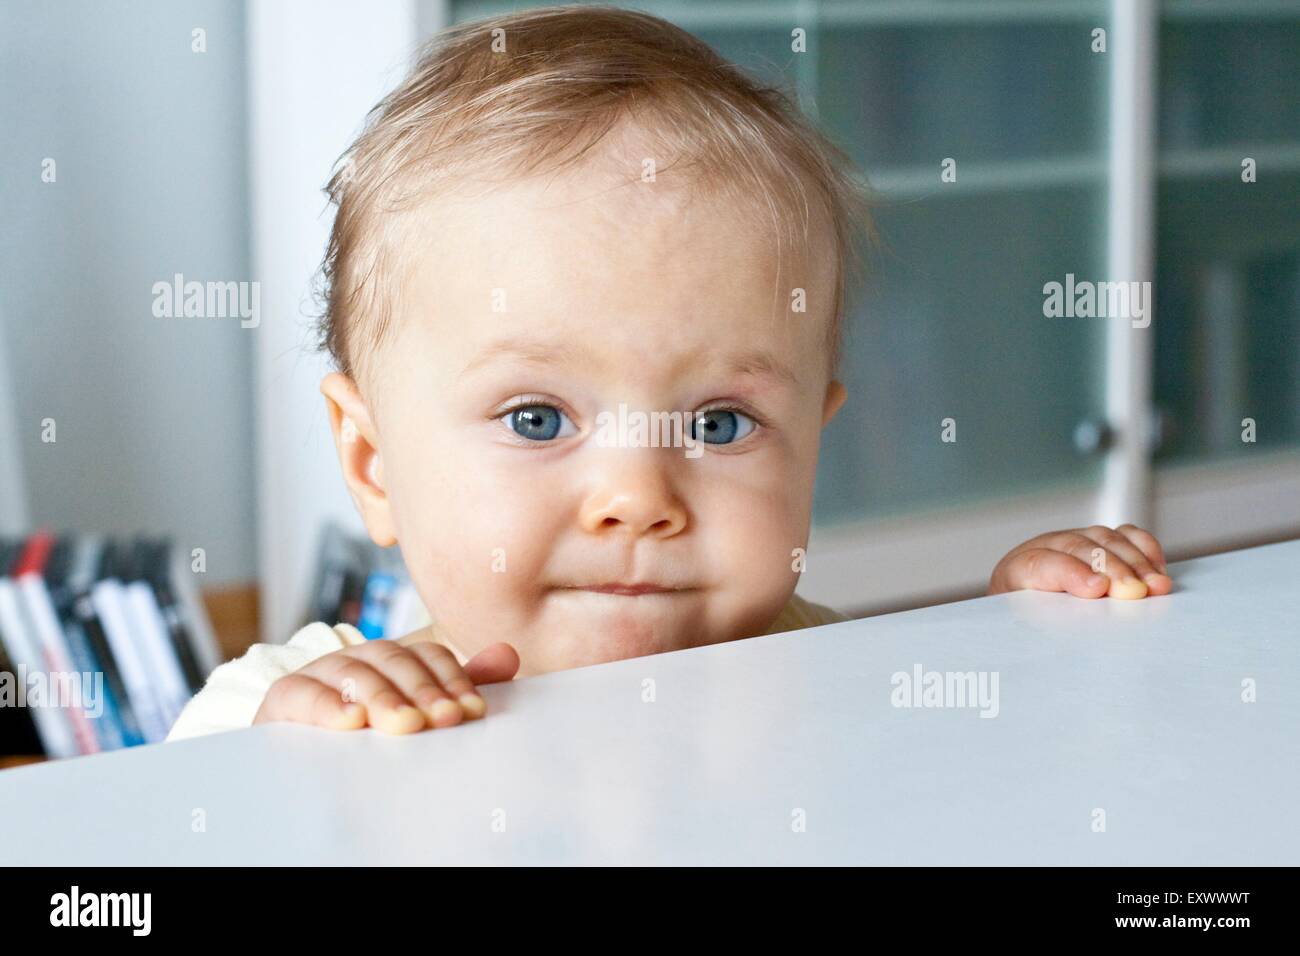 Baby gripping at table Stock Photo